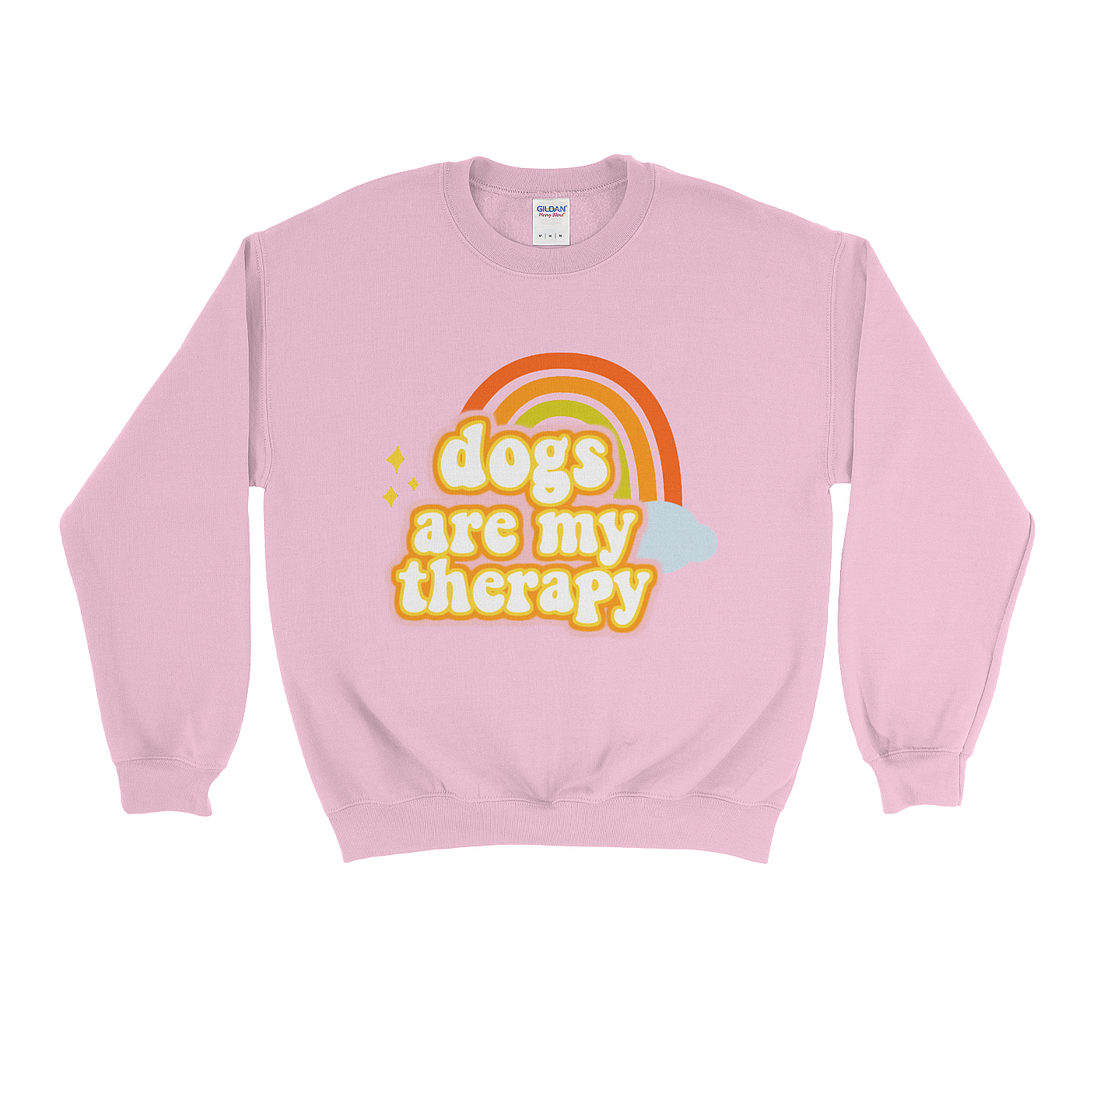 Dogs Are My Therapy - Jumper (Pink)